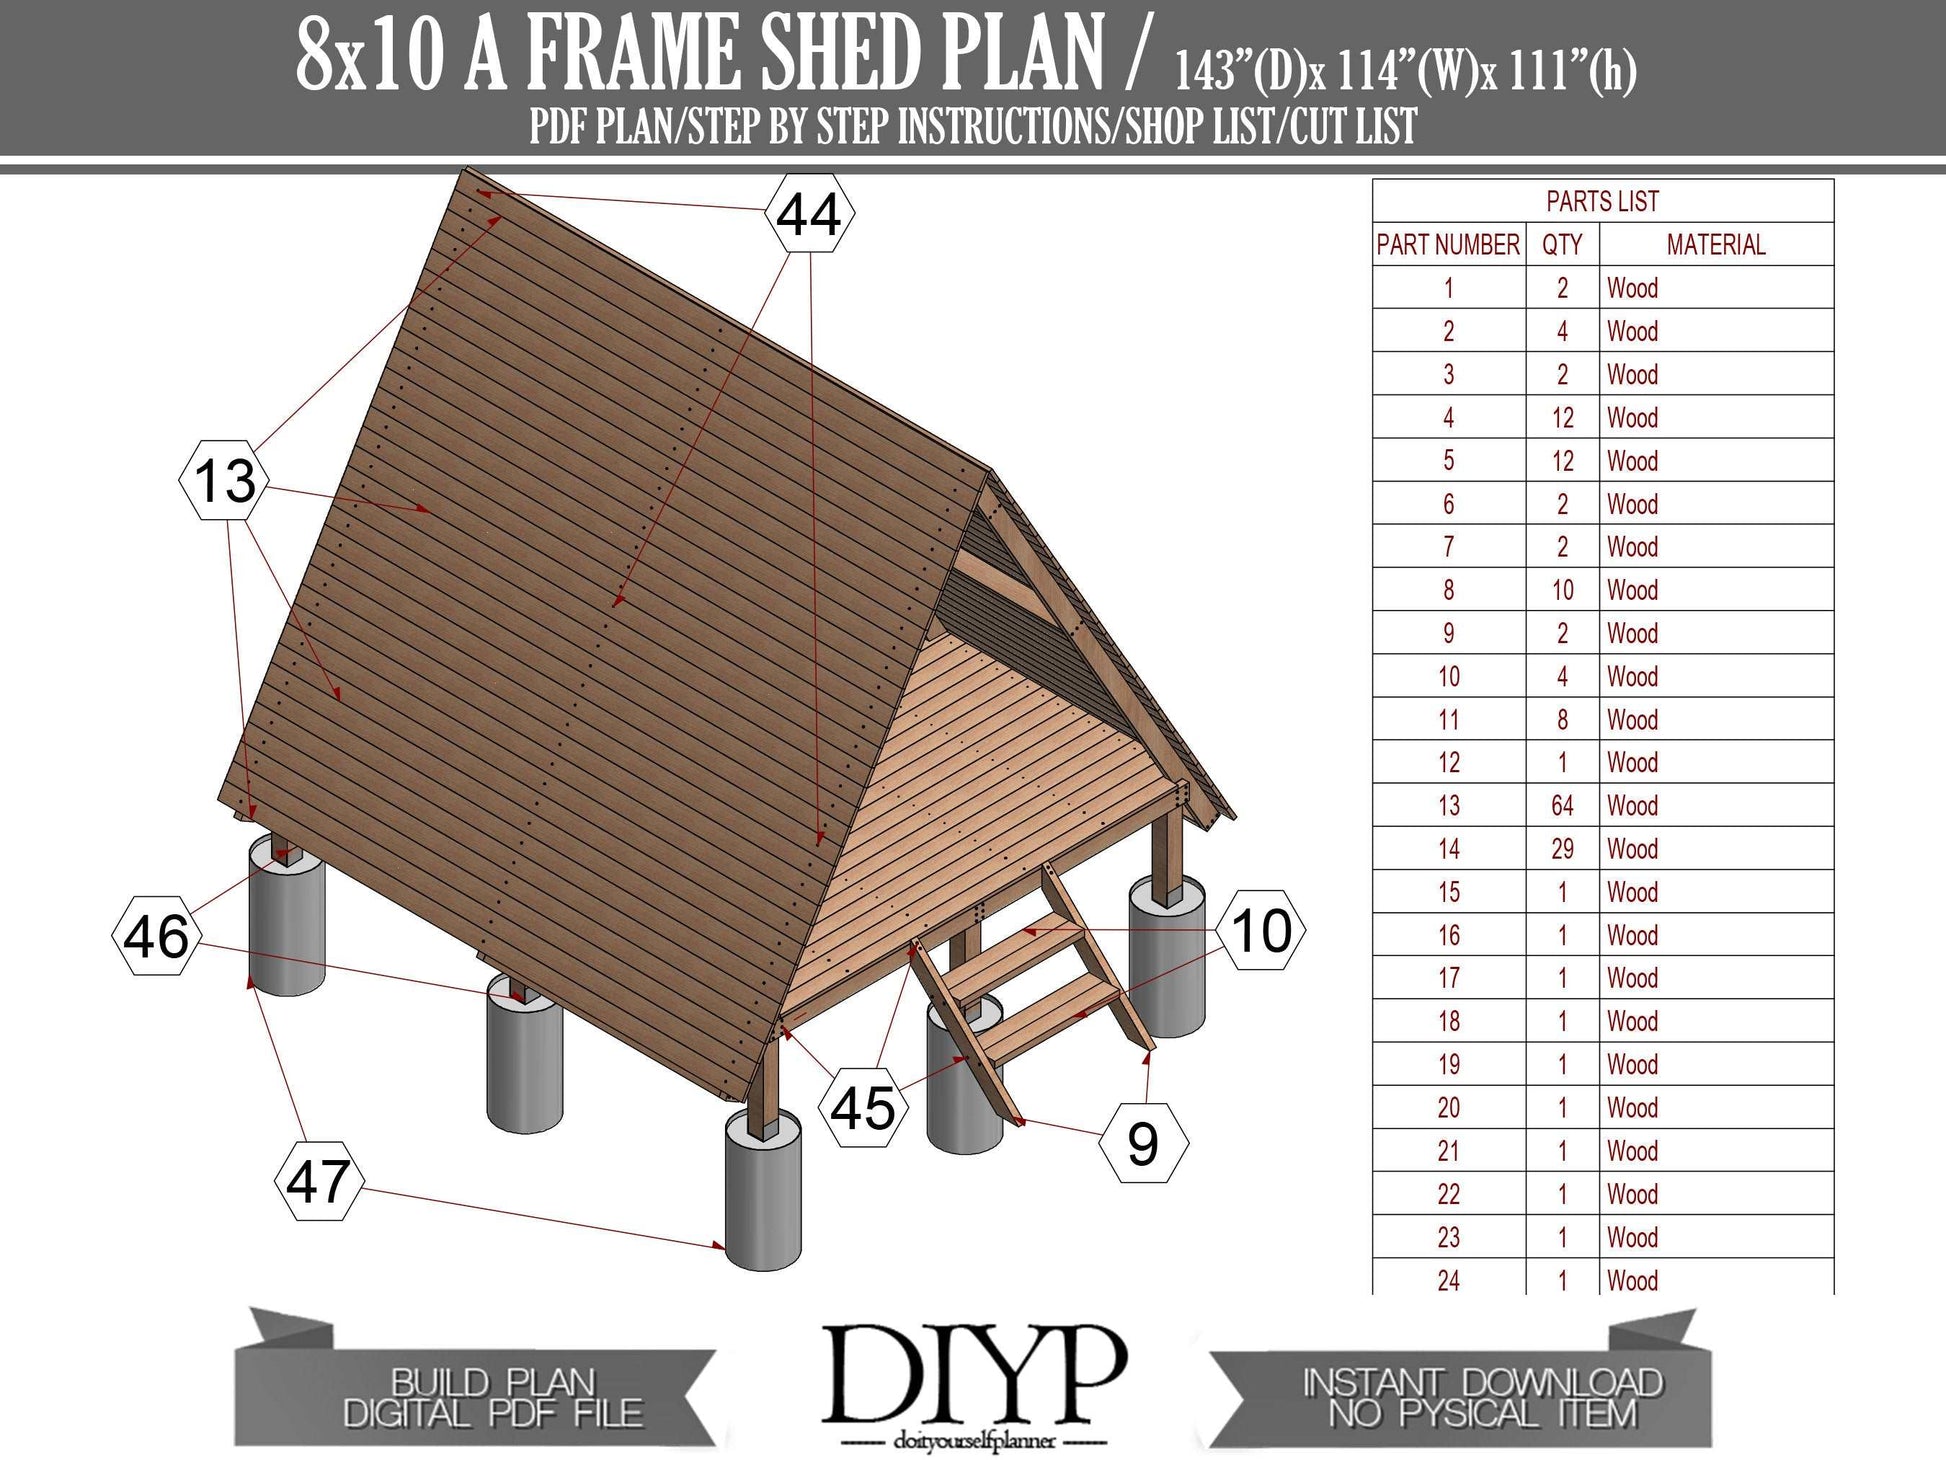 A Frame Cabin Plans - Tiny House Build Plans - Diy Woodworking plans for tiny home